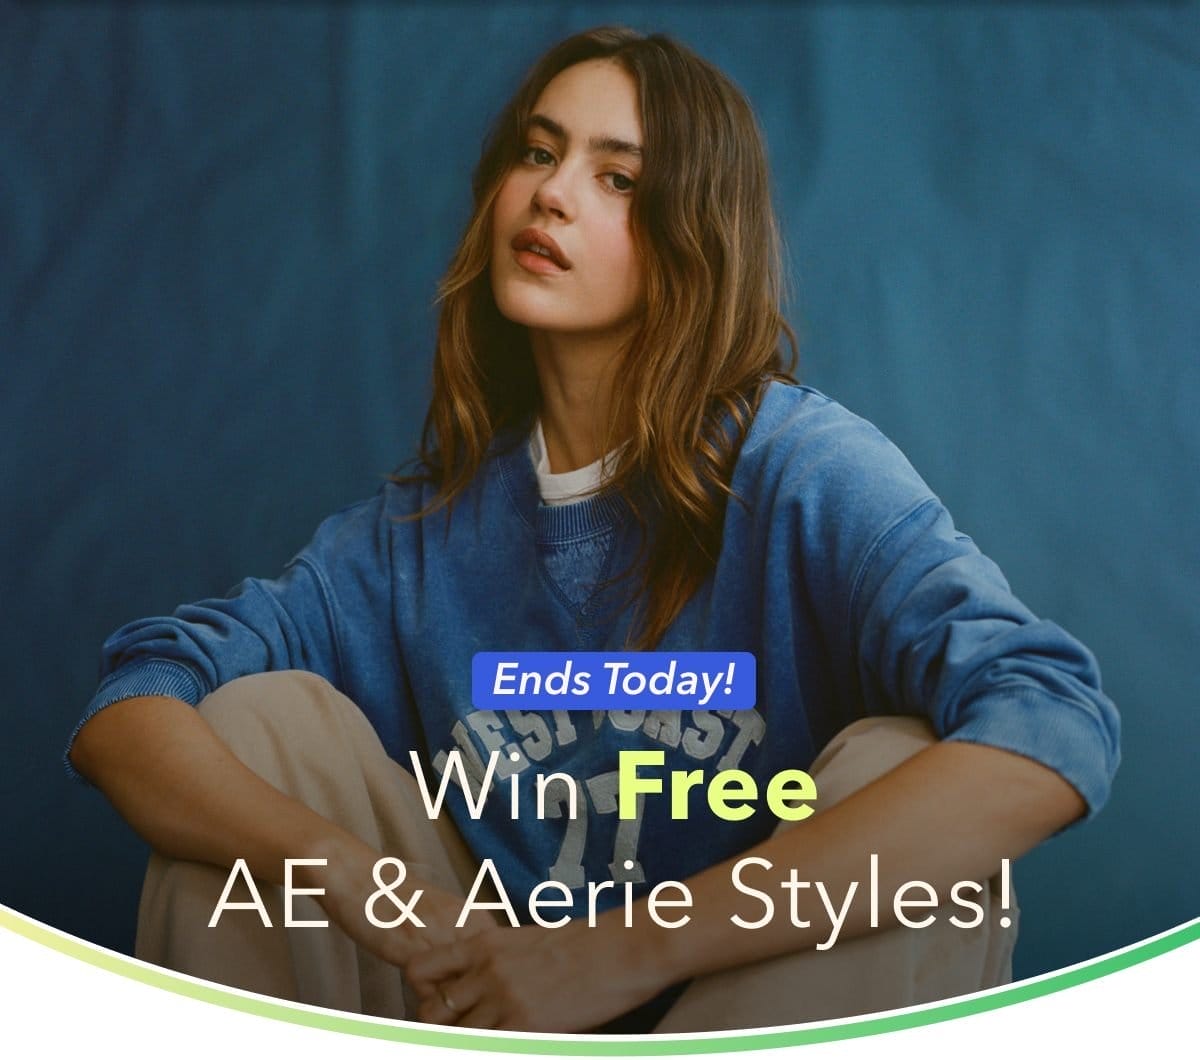 Ends Today! Win Free AE & Aerie Styles!